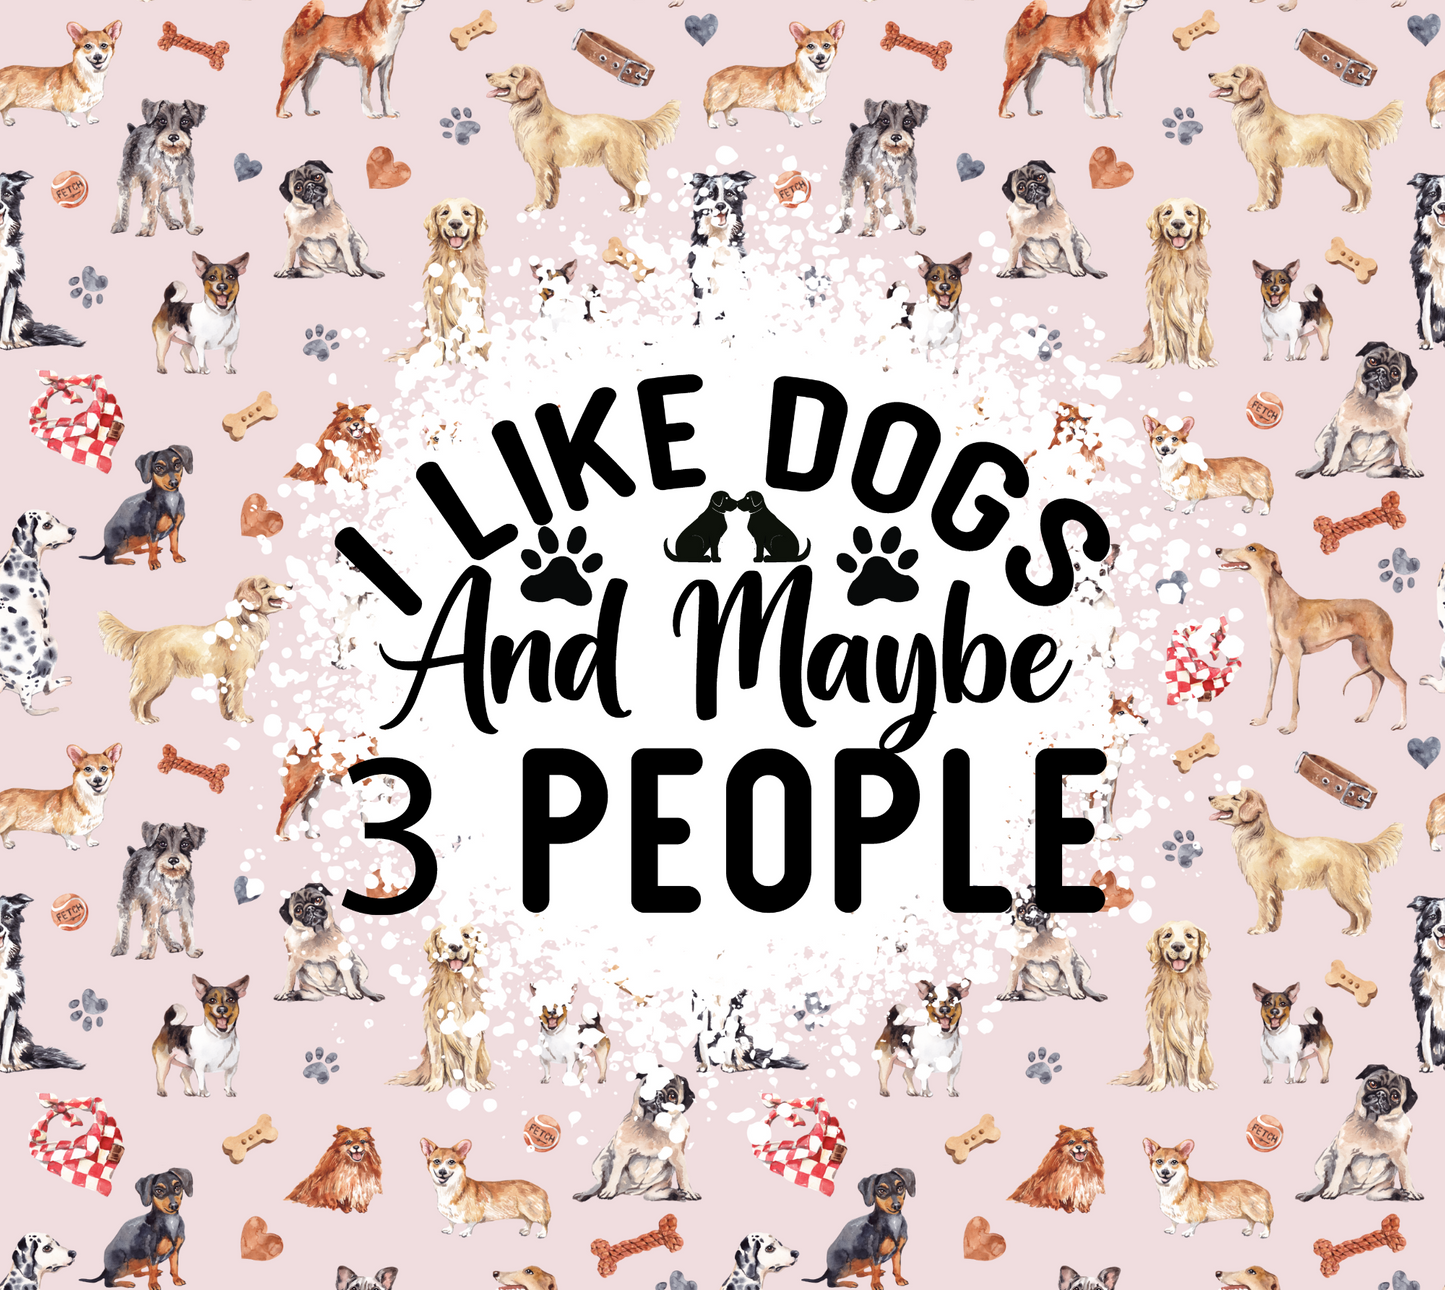 I like Dogs And Maybe 3 People - 20 Oz Sublimation Transfer